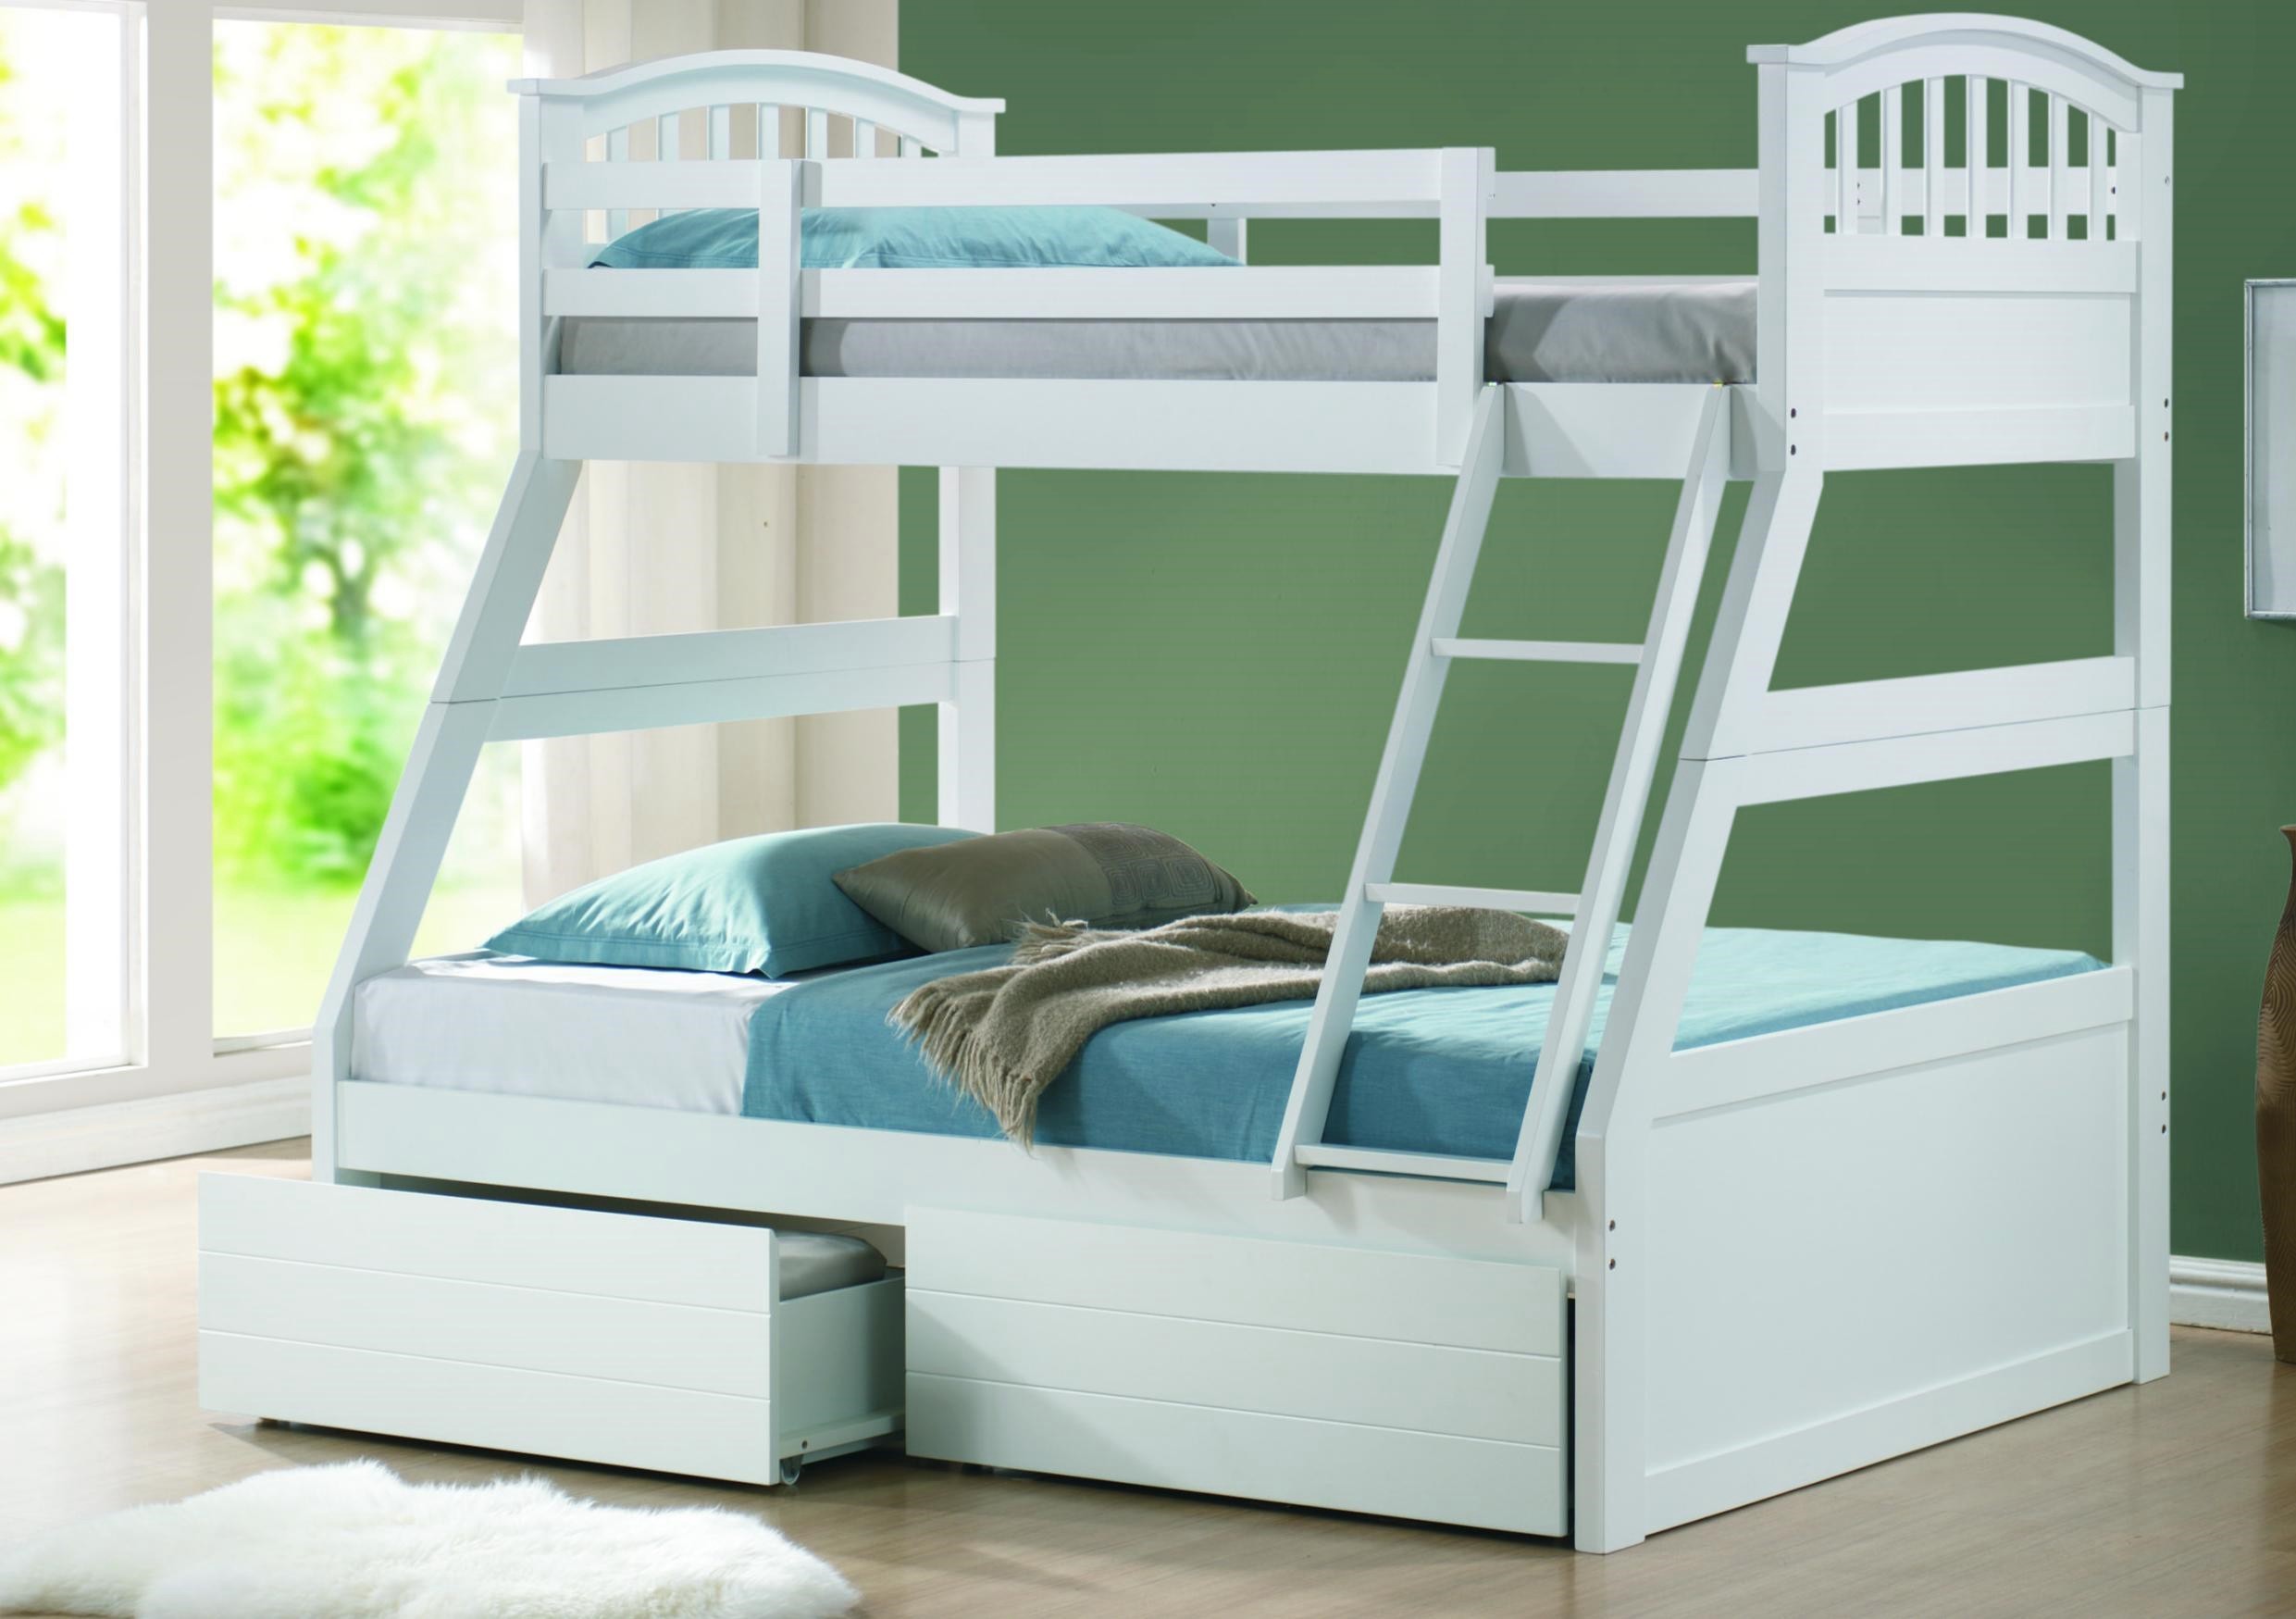 affordable modern twin beds for kids photo - 7